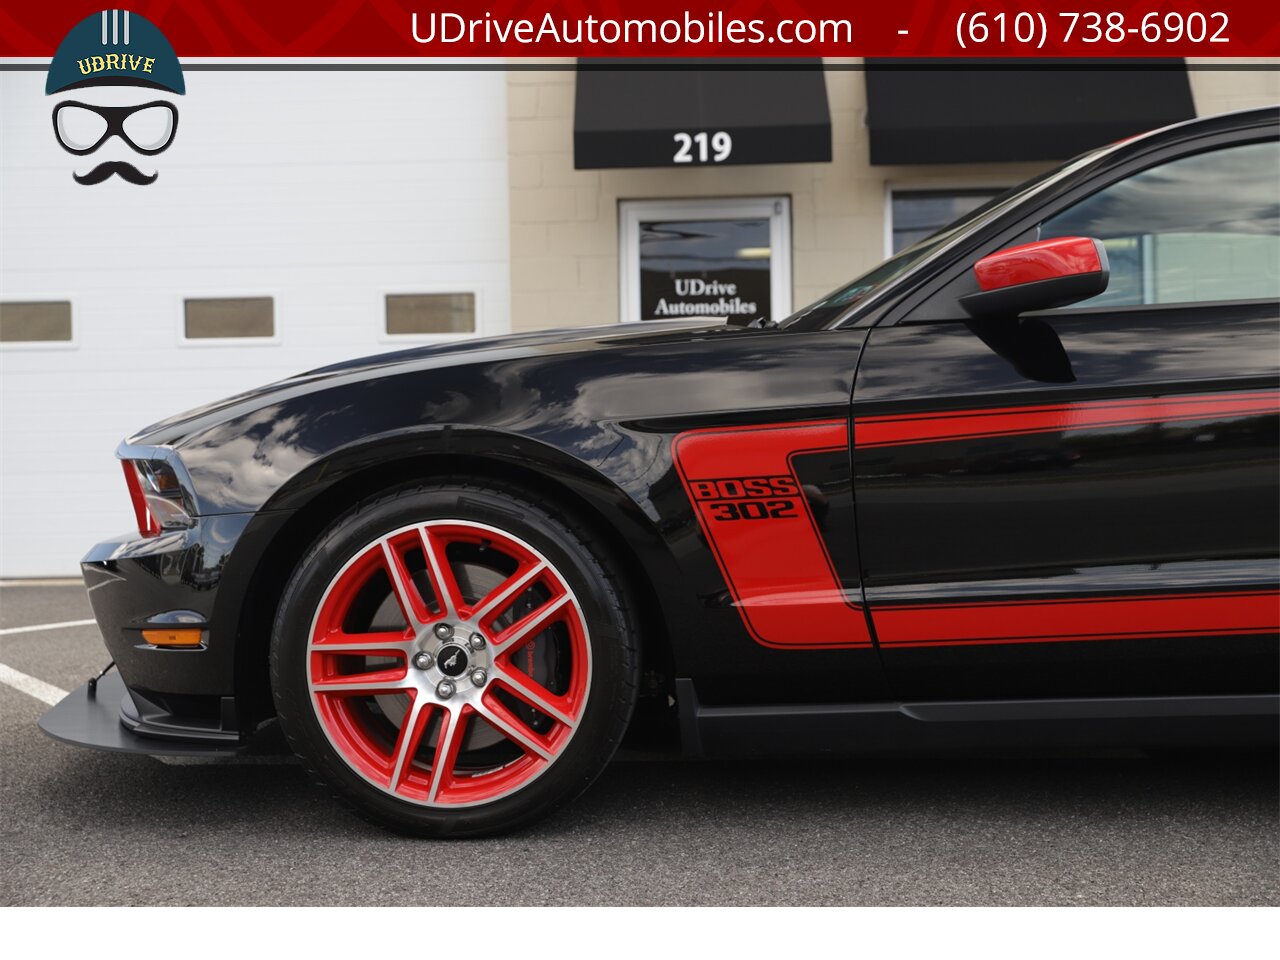 2012 Ford Mustang 866 Miles Boss 302 Laguna Seca #338 of 750  Red TracKey Activated - Photo 7 - West Chester, PA 19382